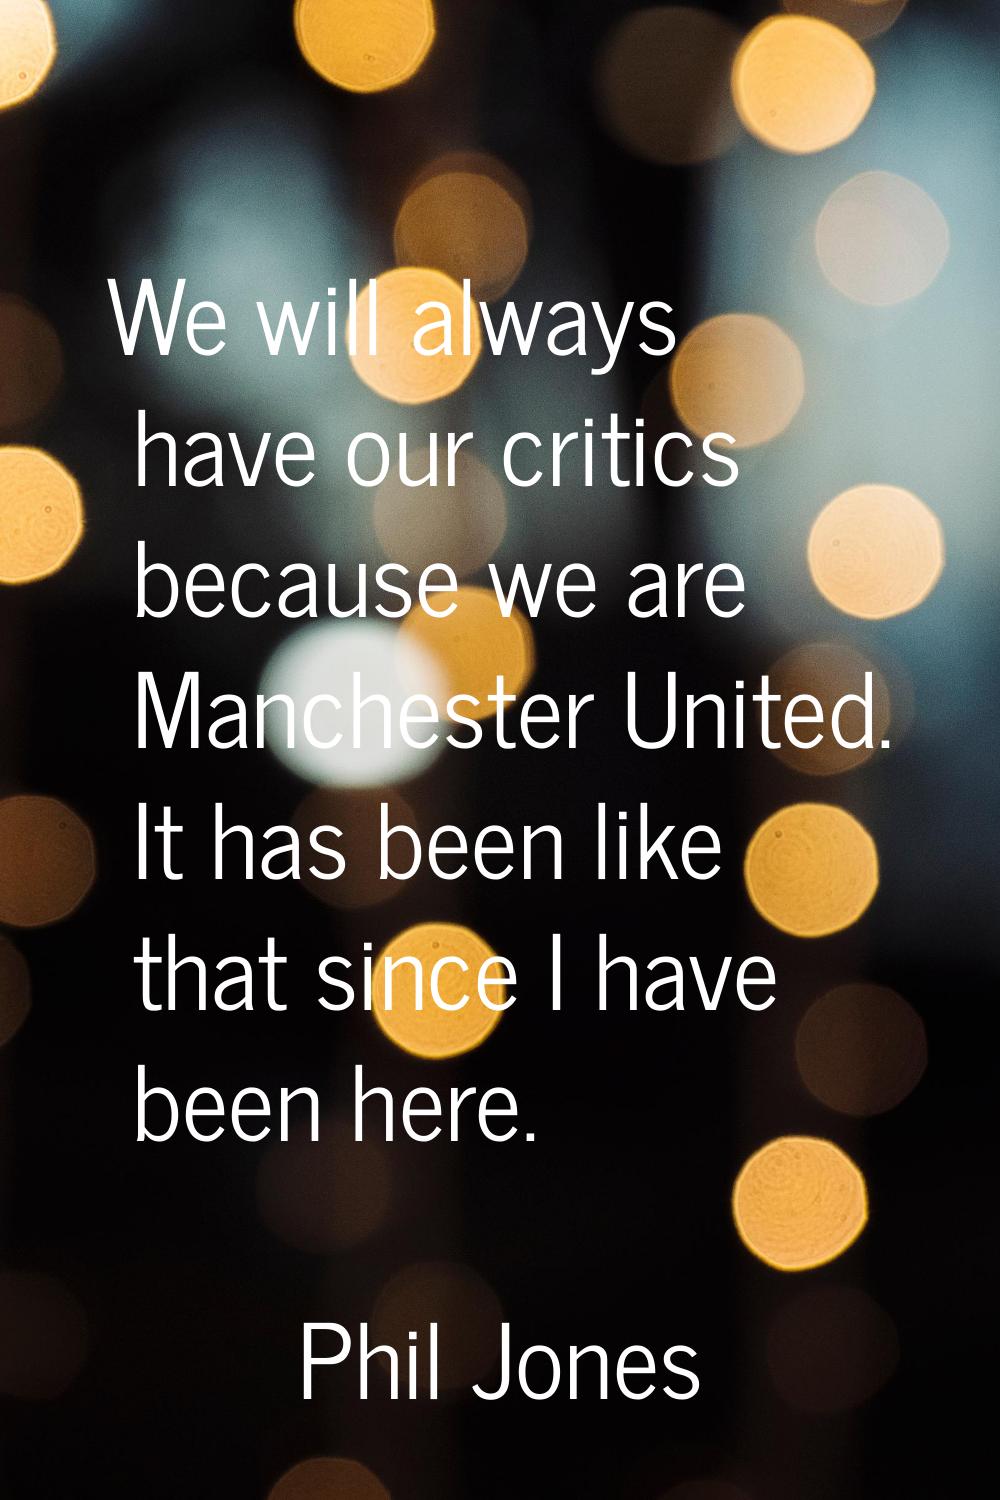 We will always have our critics because we are Manchester United. It has been like that since I hav